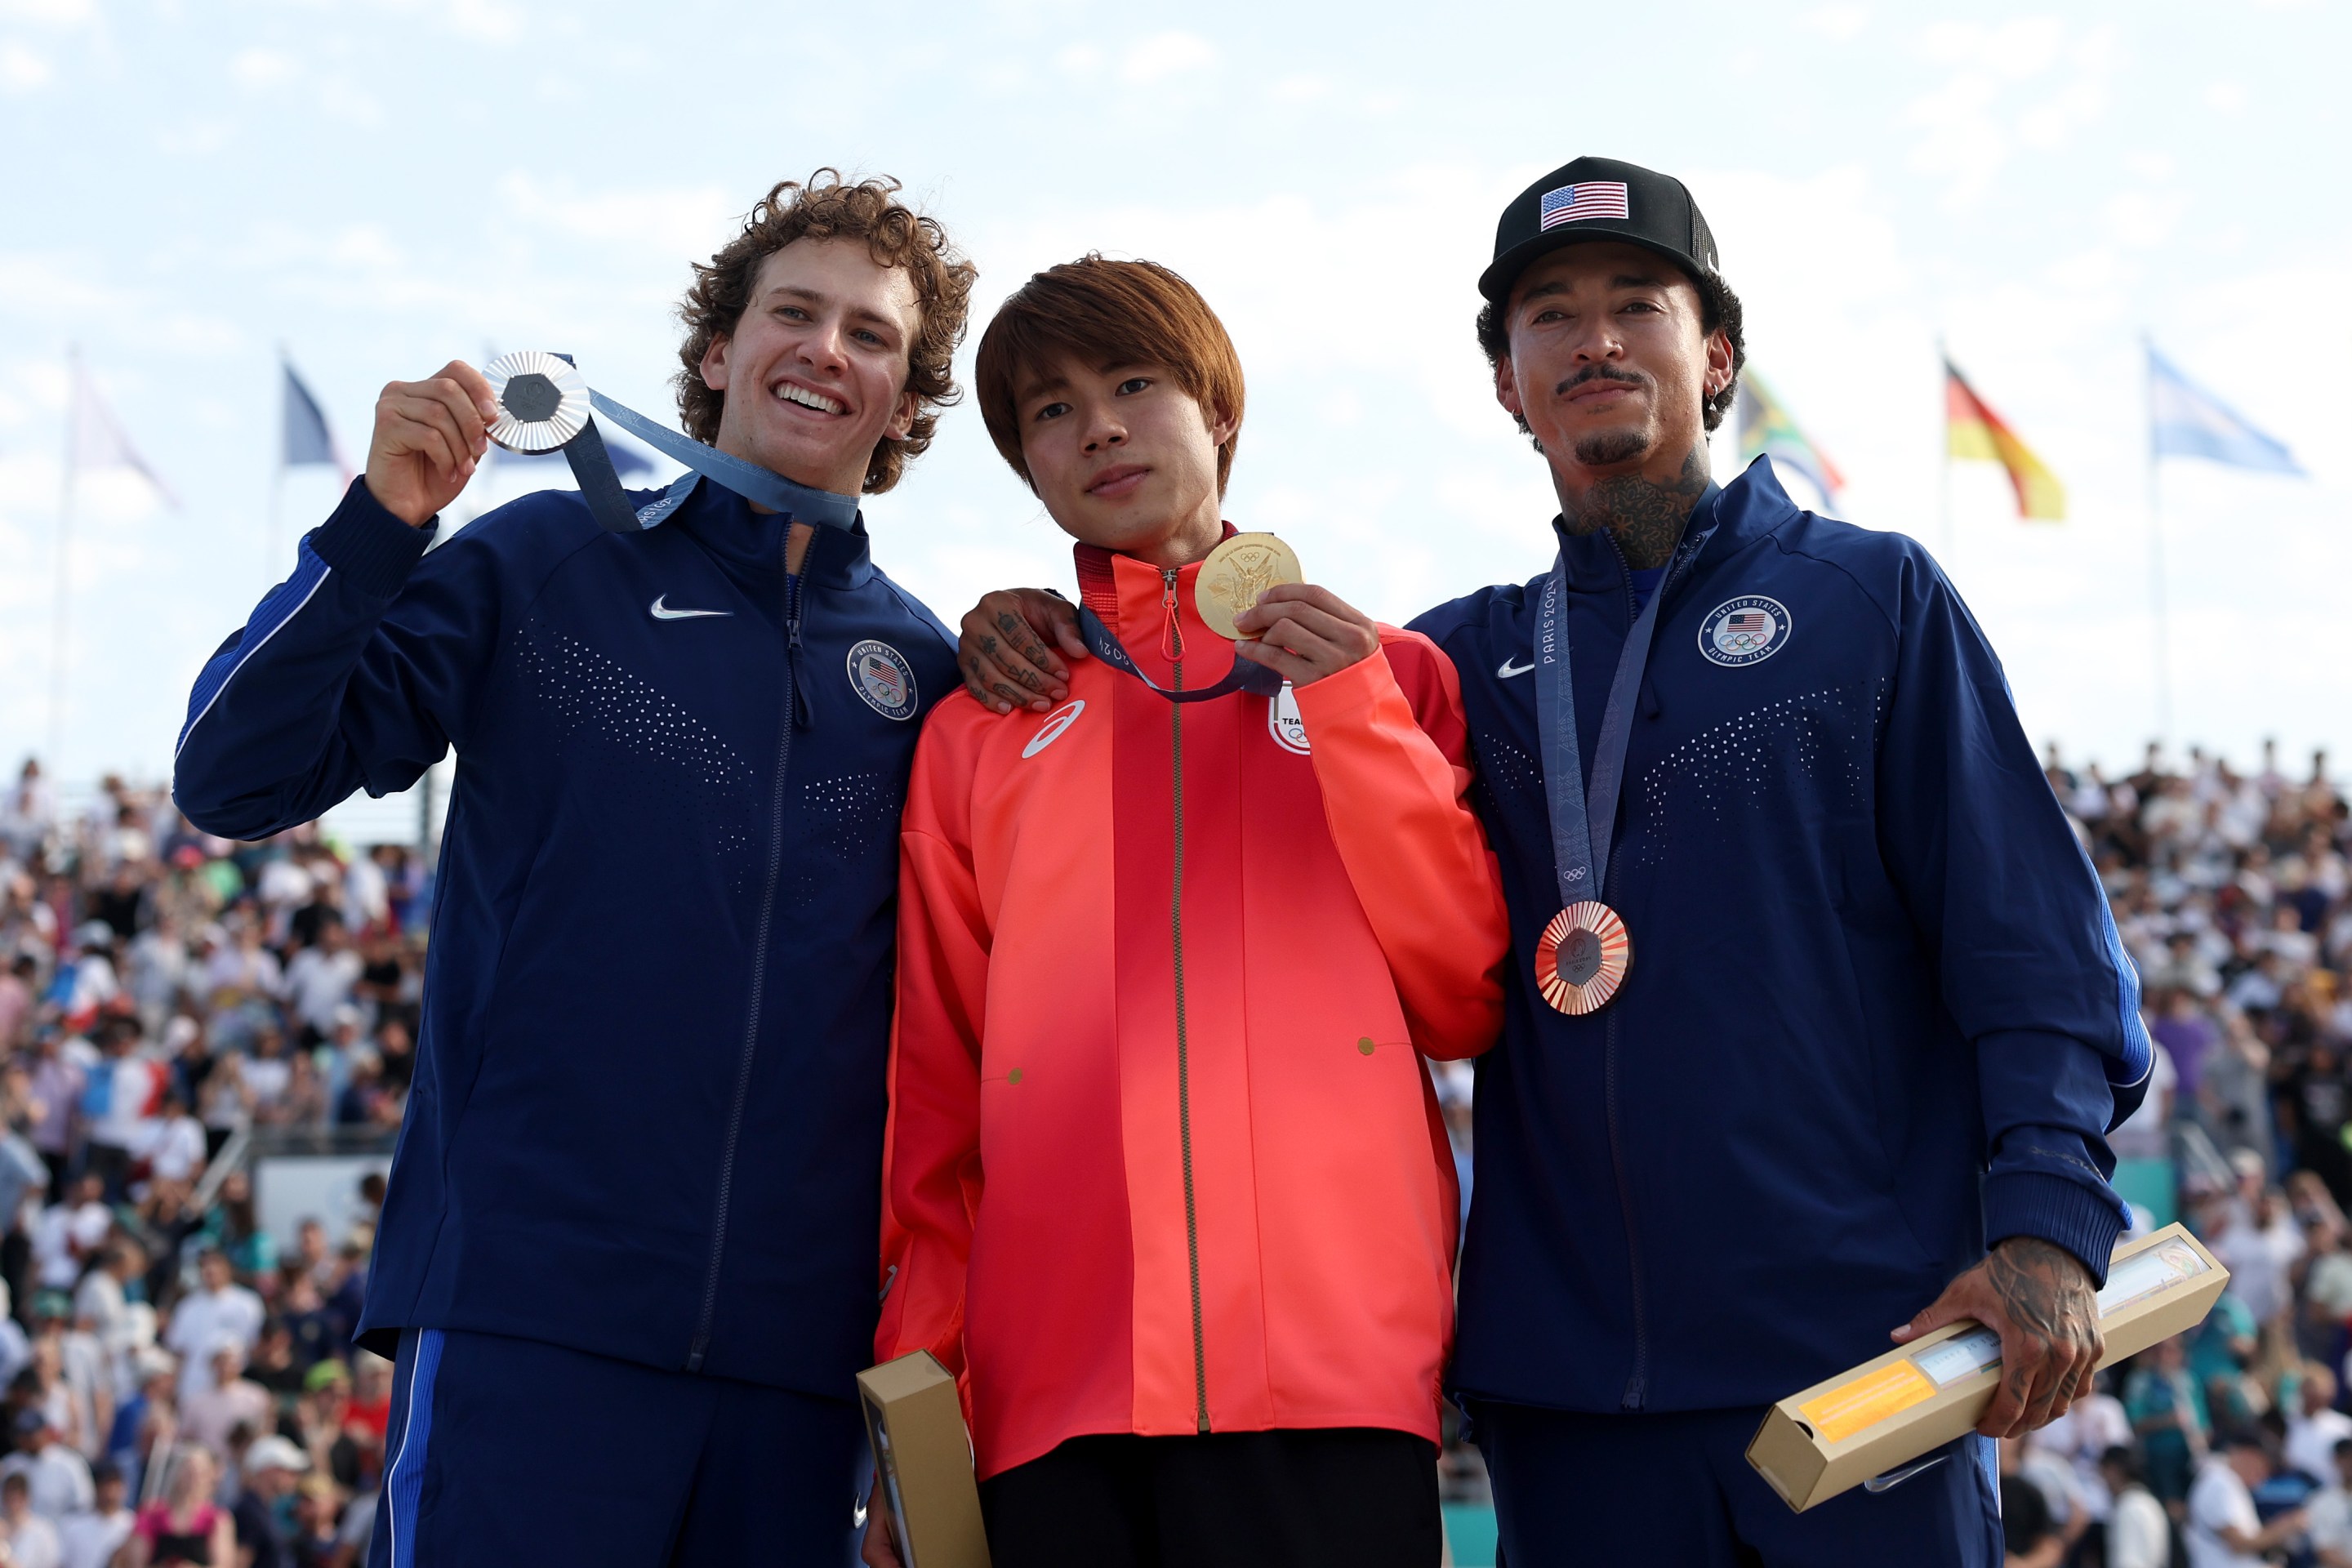 Gold medalist Yuto Horigome of Team Japan (C), Silver medalist Jagger Eaton of Team United States (L) and Bronze medalist Nyjah Huston of Team United States (R) pose on the podium uring the Men's Street Finals on day three of the Olympic Games Paris 2024 at Place de la Concorde on July 29, 2024 in Paris, France.